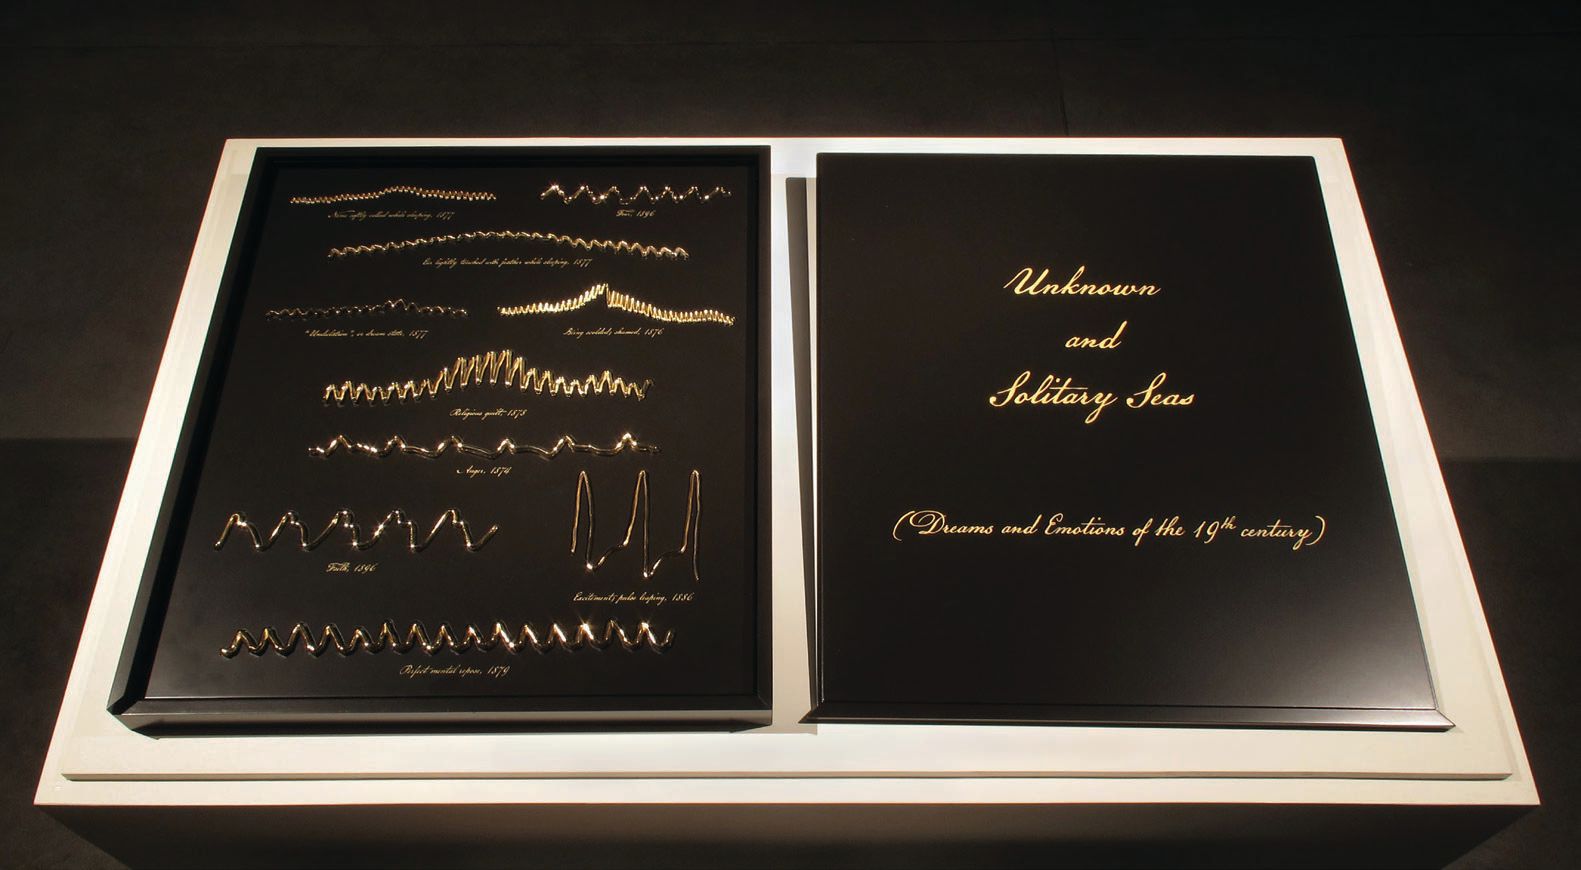 “Unknown and Solitary Seas (Dreams and Emotions of the 19th Century)” (2018, earliest waveform recordings of blood fl owing from the heart and in the brain during sleep, dreaming and various emotional states [1874-96], rendered and 3D-printed in brass-plated stainless steel, lacquered maple and 22K gold leaf) image courtesy of the artist